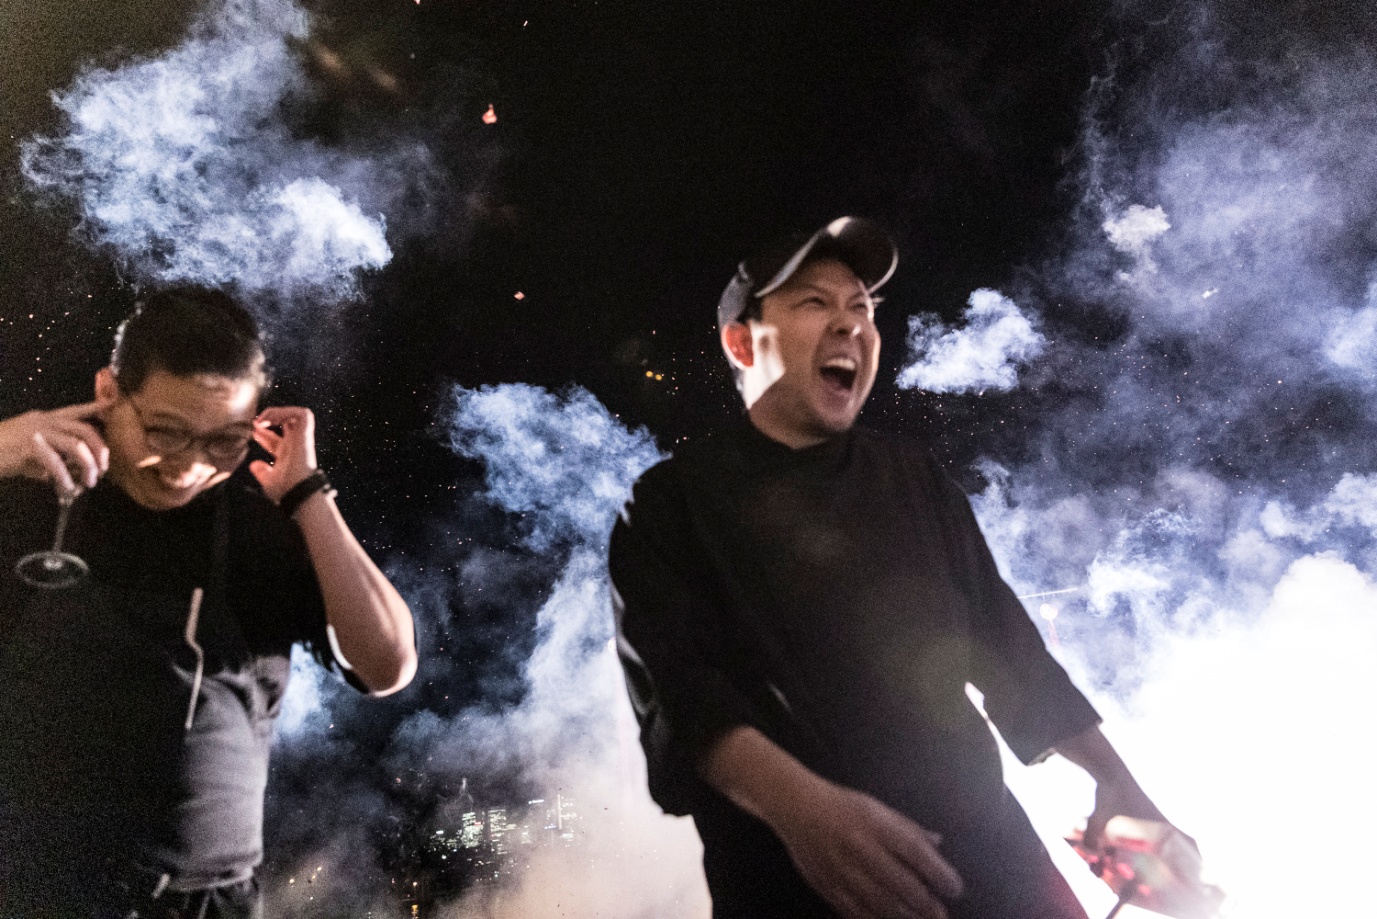 E:\655-20190727\Draft\01. B section\Cuisine\B11\CHUUKA chefs Chase Kojima and Victor Liong letting off firecrackers at the launch party.jpg